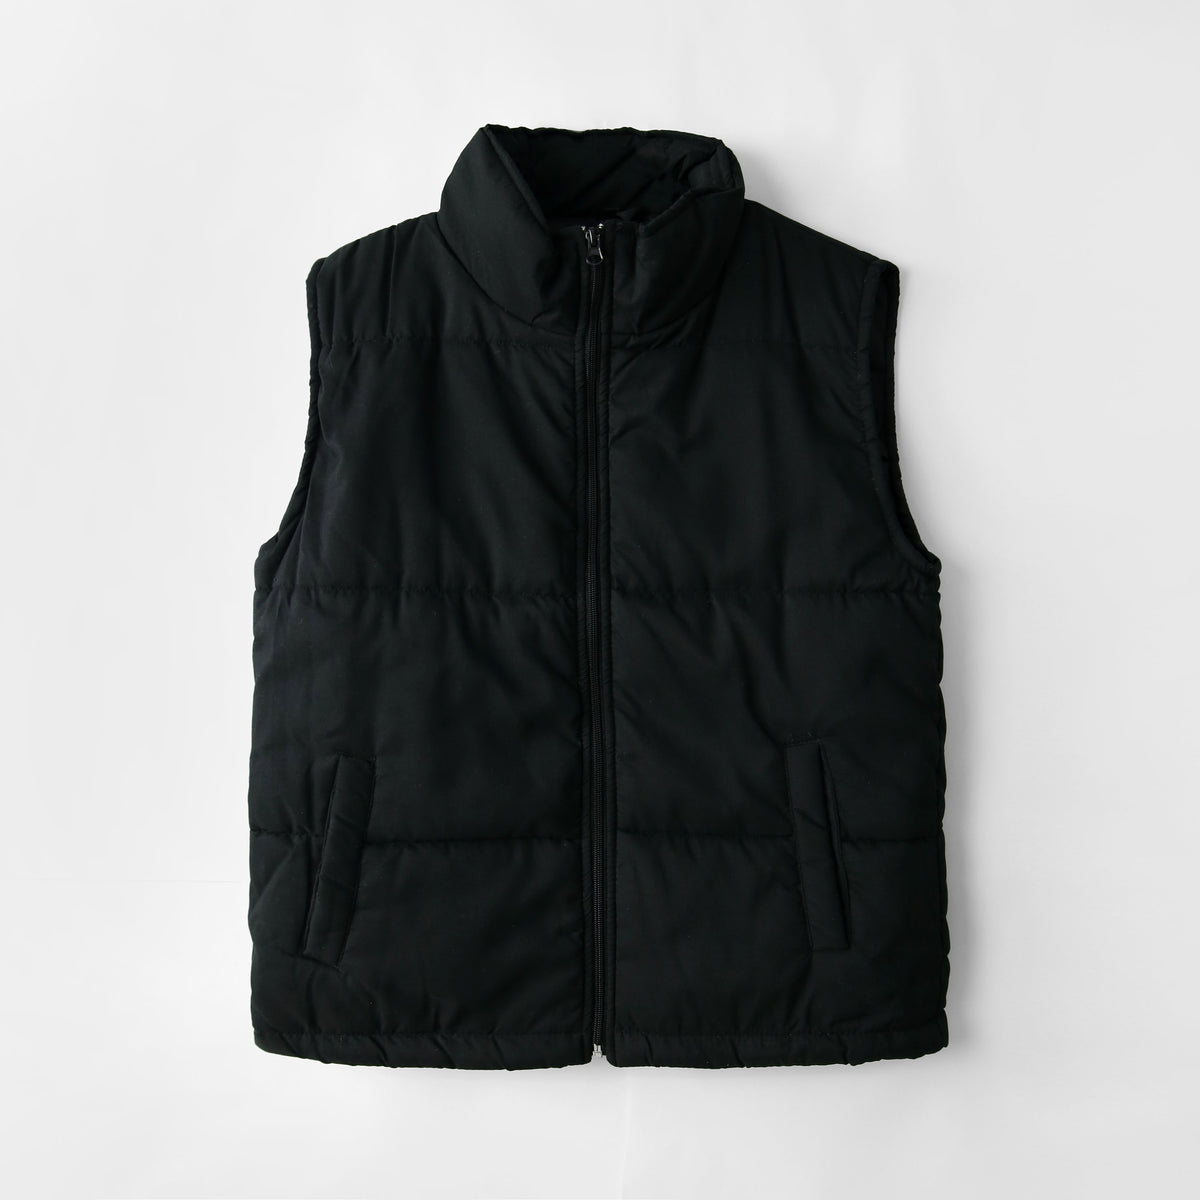 Exclusive Warm Puffer Sleeveless Black Jacket For Men